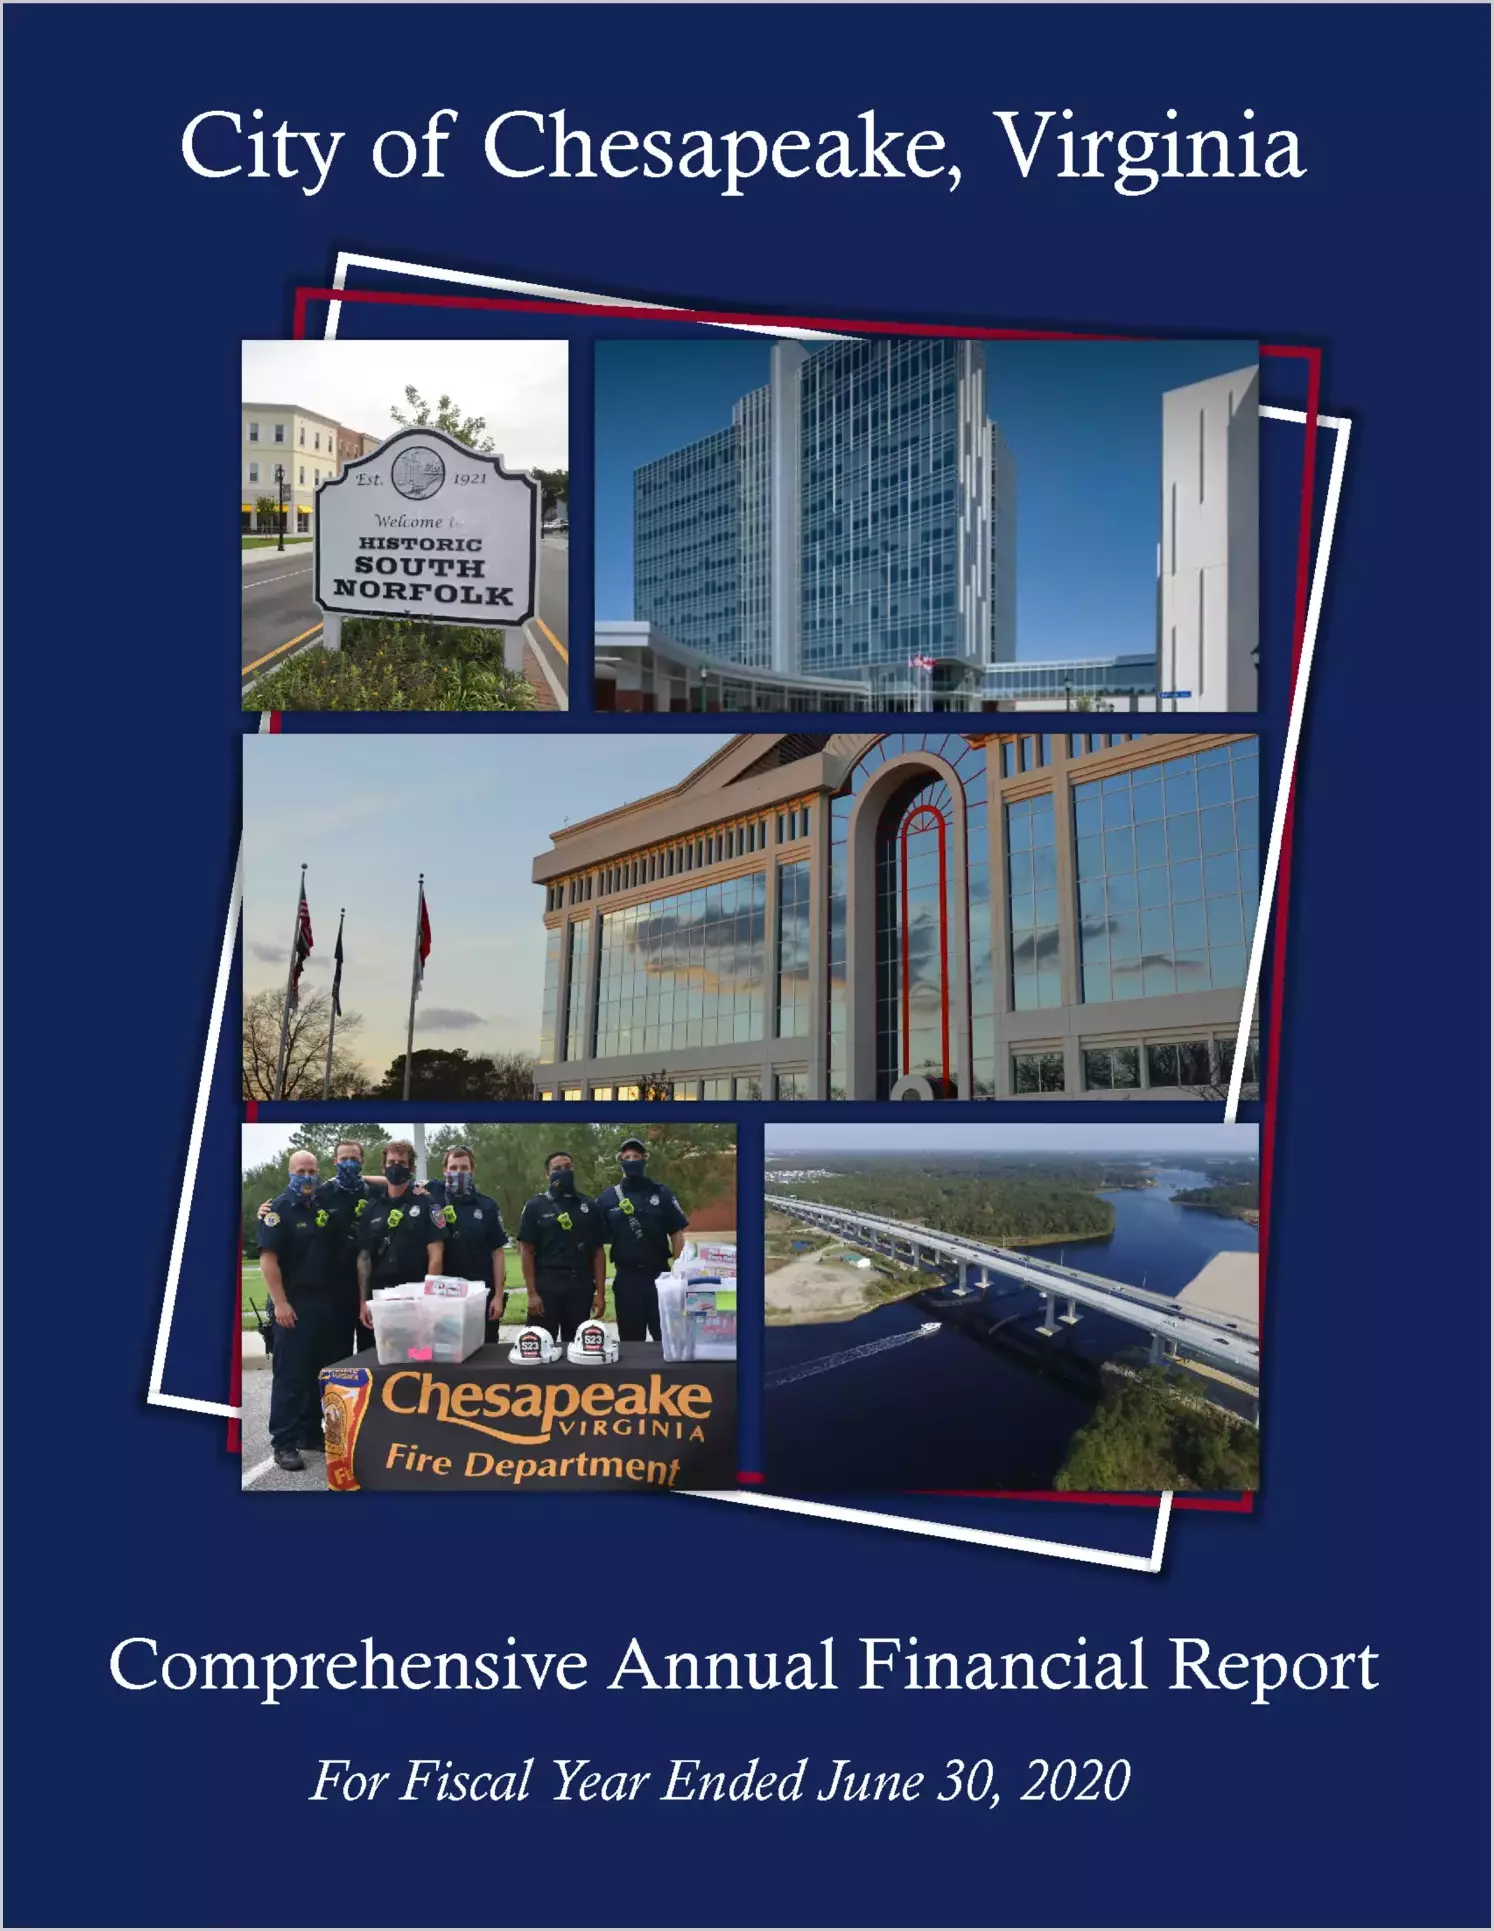 2020 Annual Financial Report for City of Chesapeake